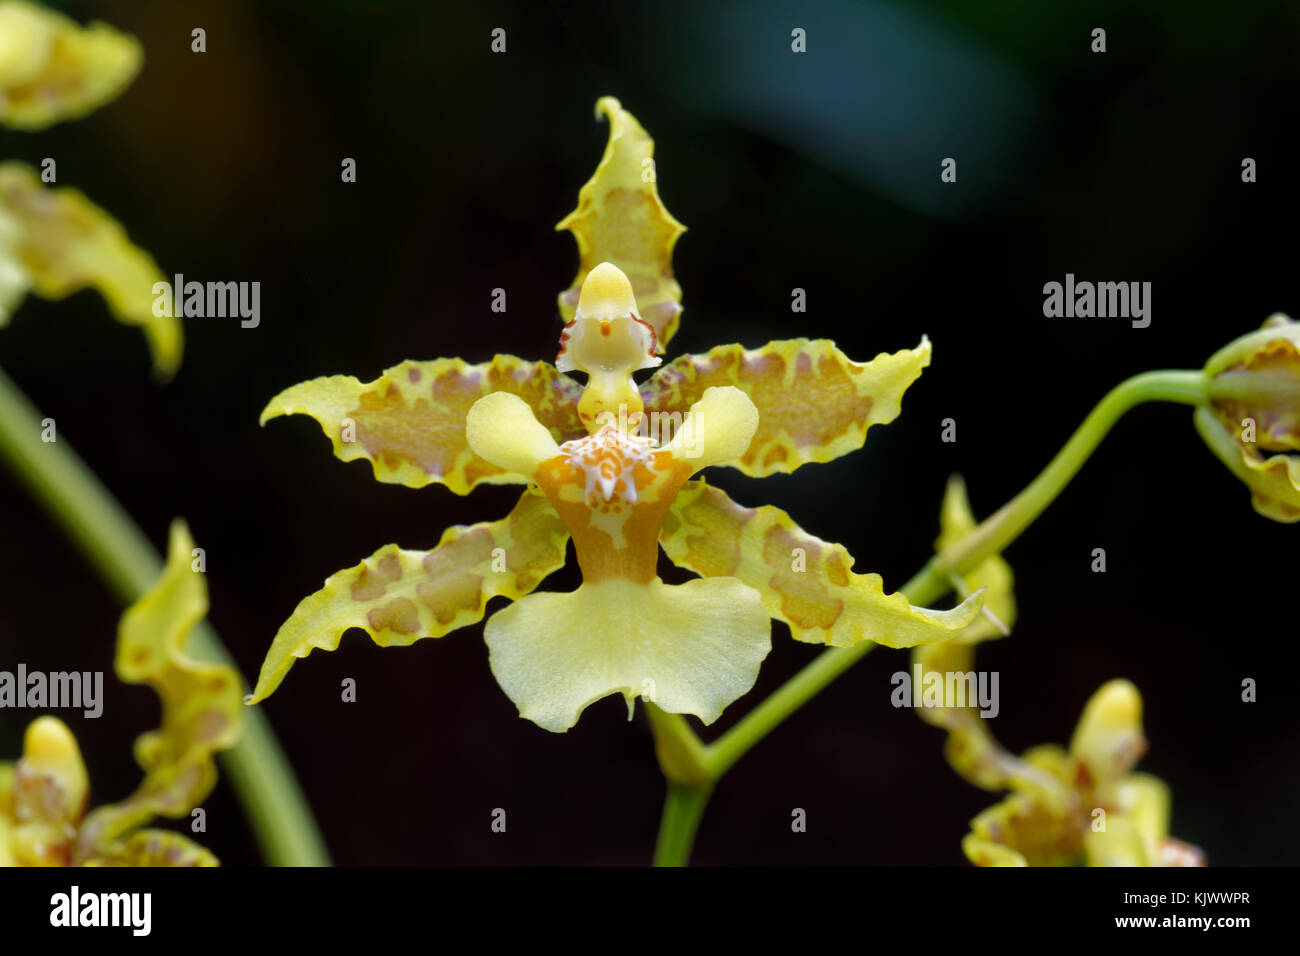 The orchid "Oncidium lineoligerum" is occurring in the forests of Costa Rica, Panama, Columbia, Ecuador and Peru. It's living as epiphyte on trees. Stock Photo